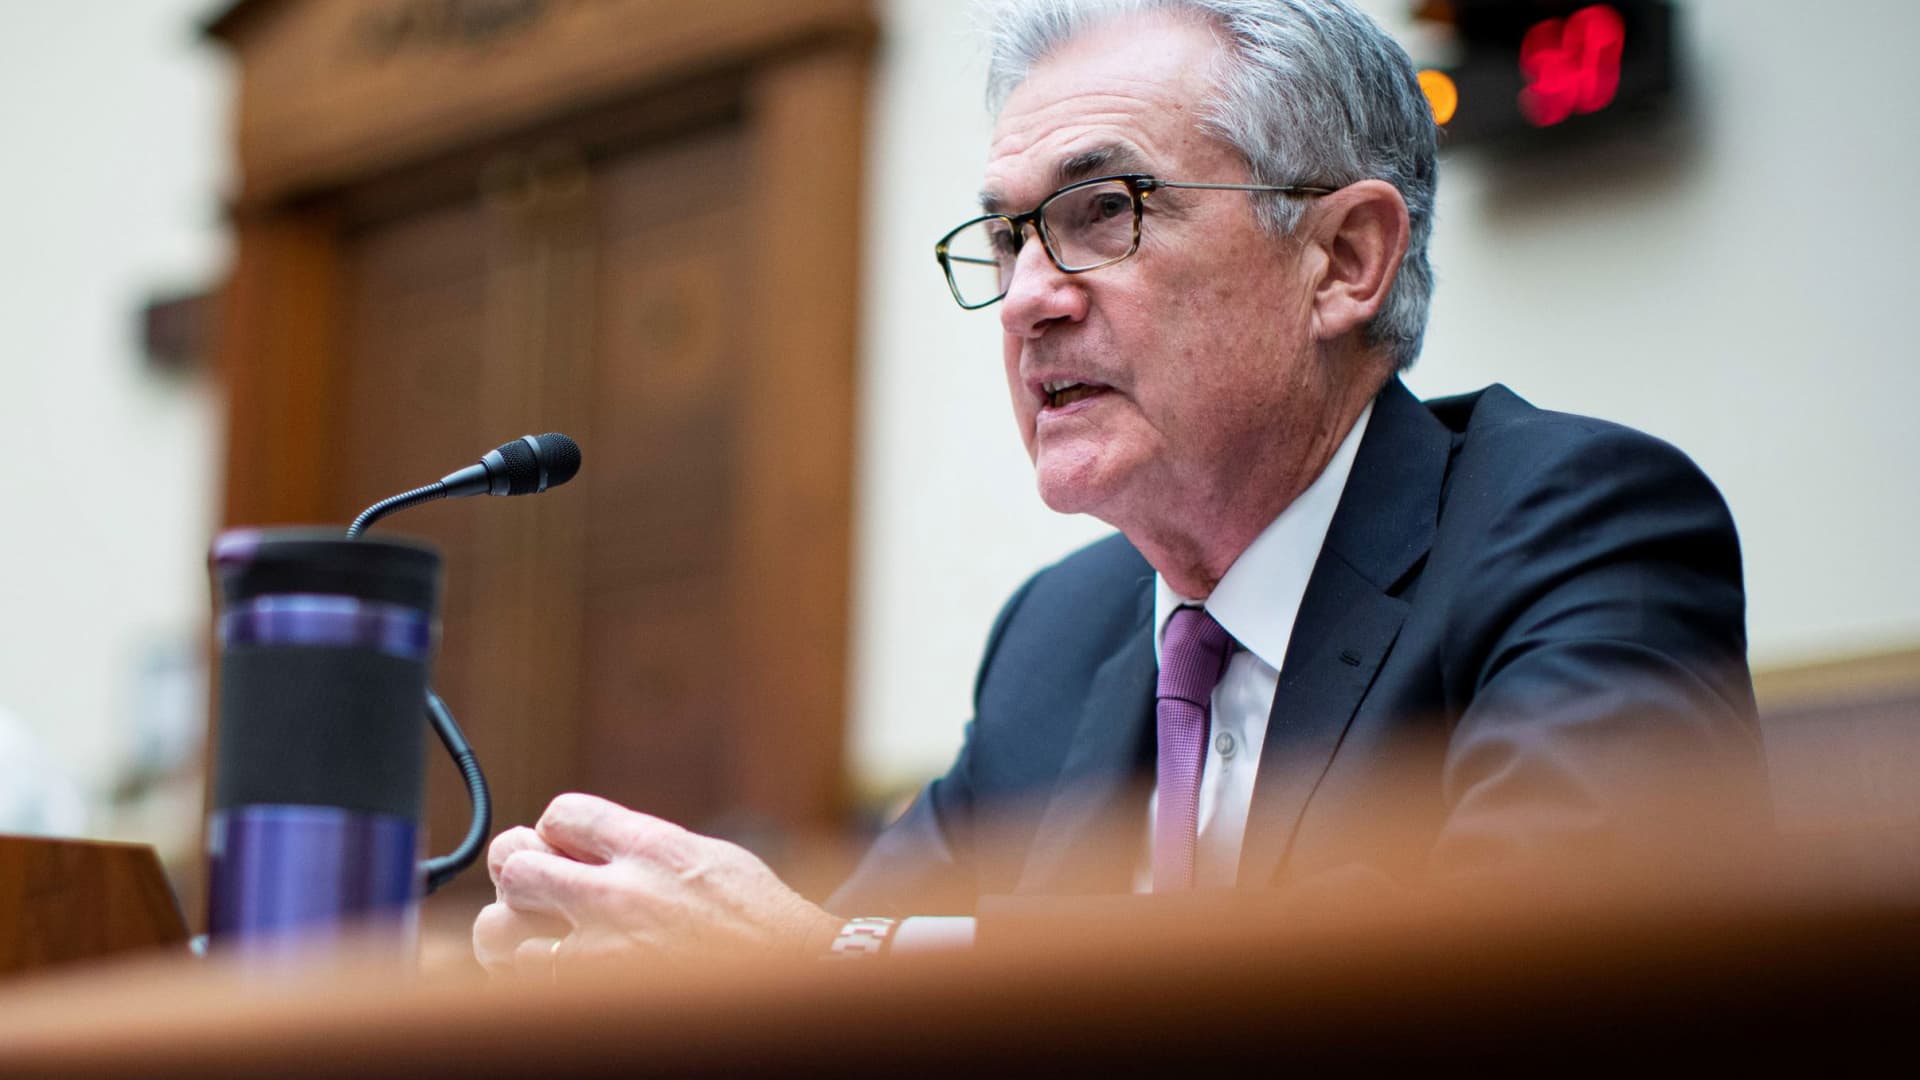 Federal Reserve Chairman Jerome Powell attends the House Financial Services Committee hearing on Capitol Hill in Washington, U.S., September 30, 2021.